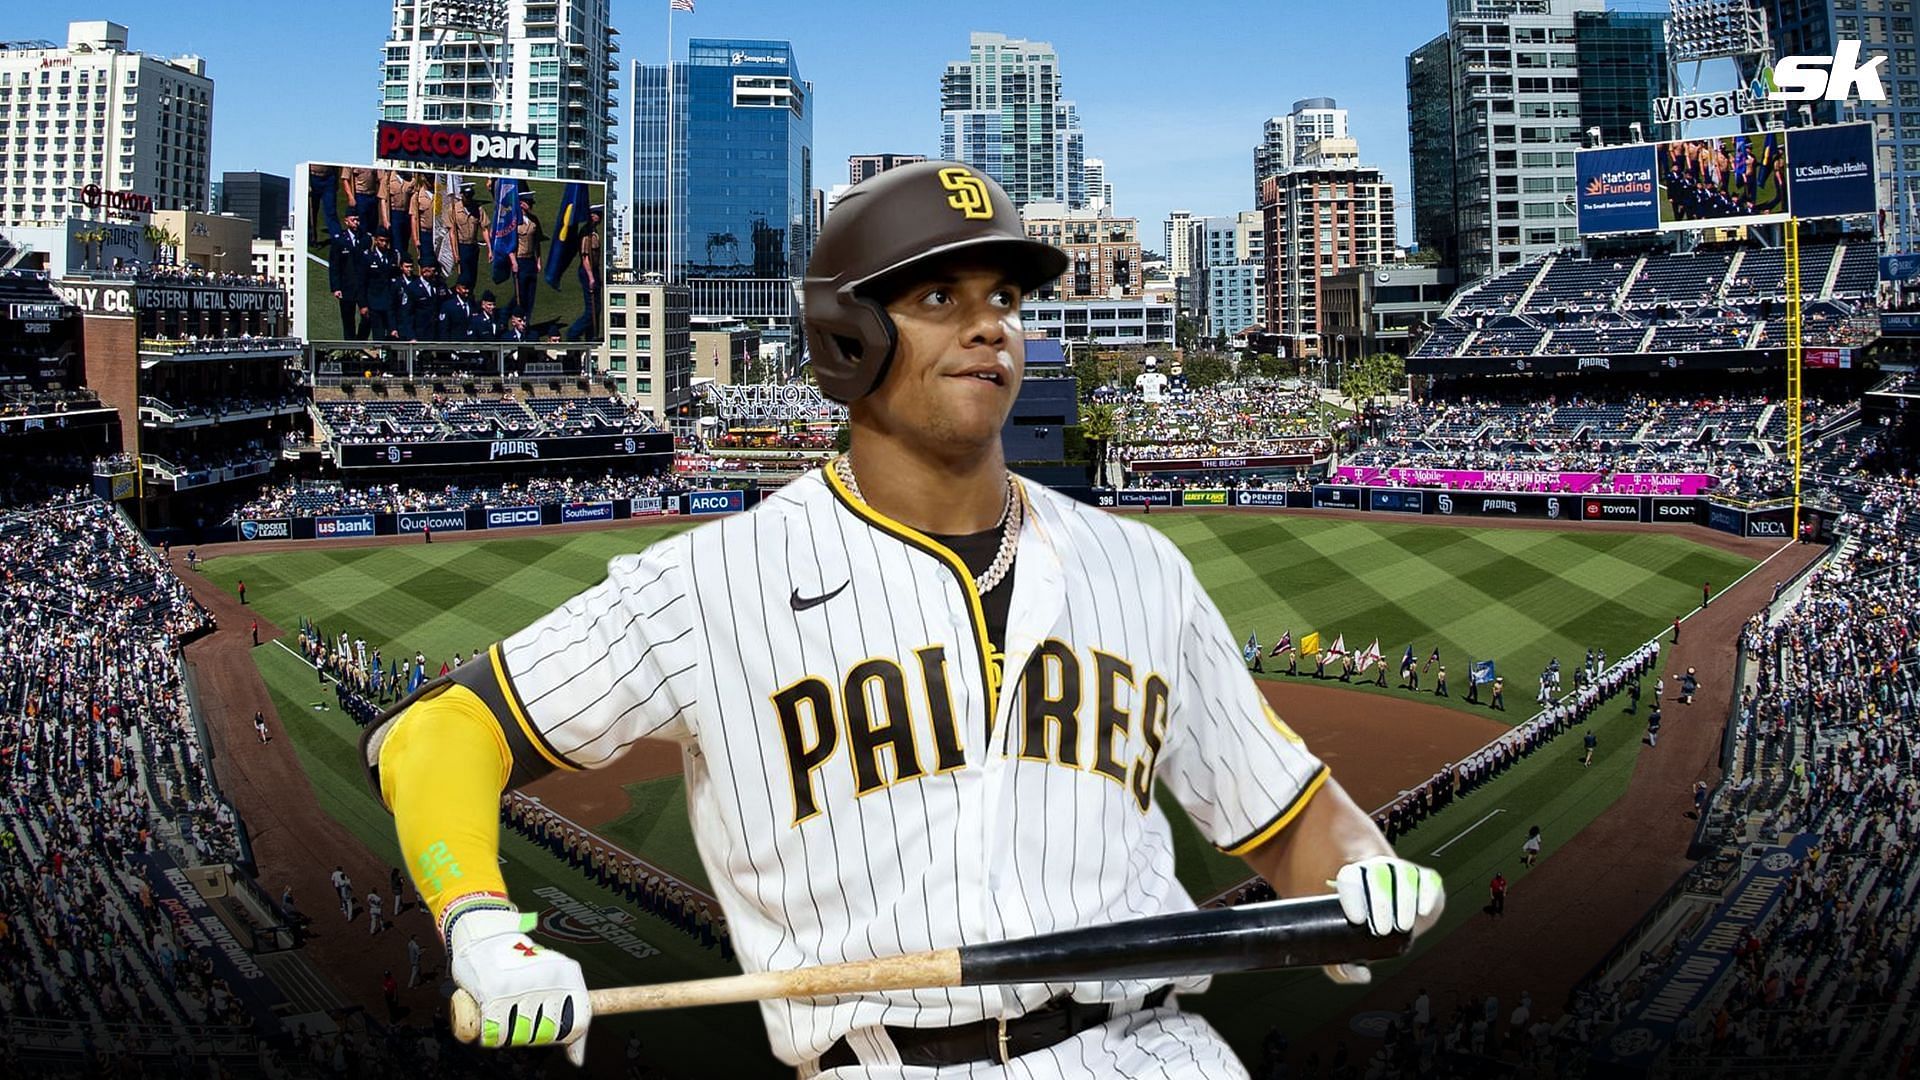 Play ball! What's new to eat at Petco Park for the 2023 baseball